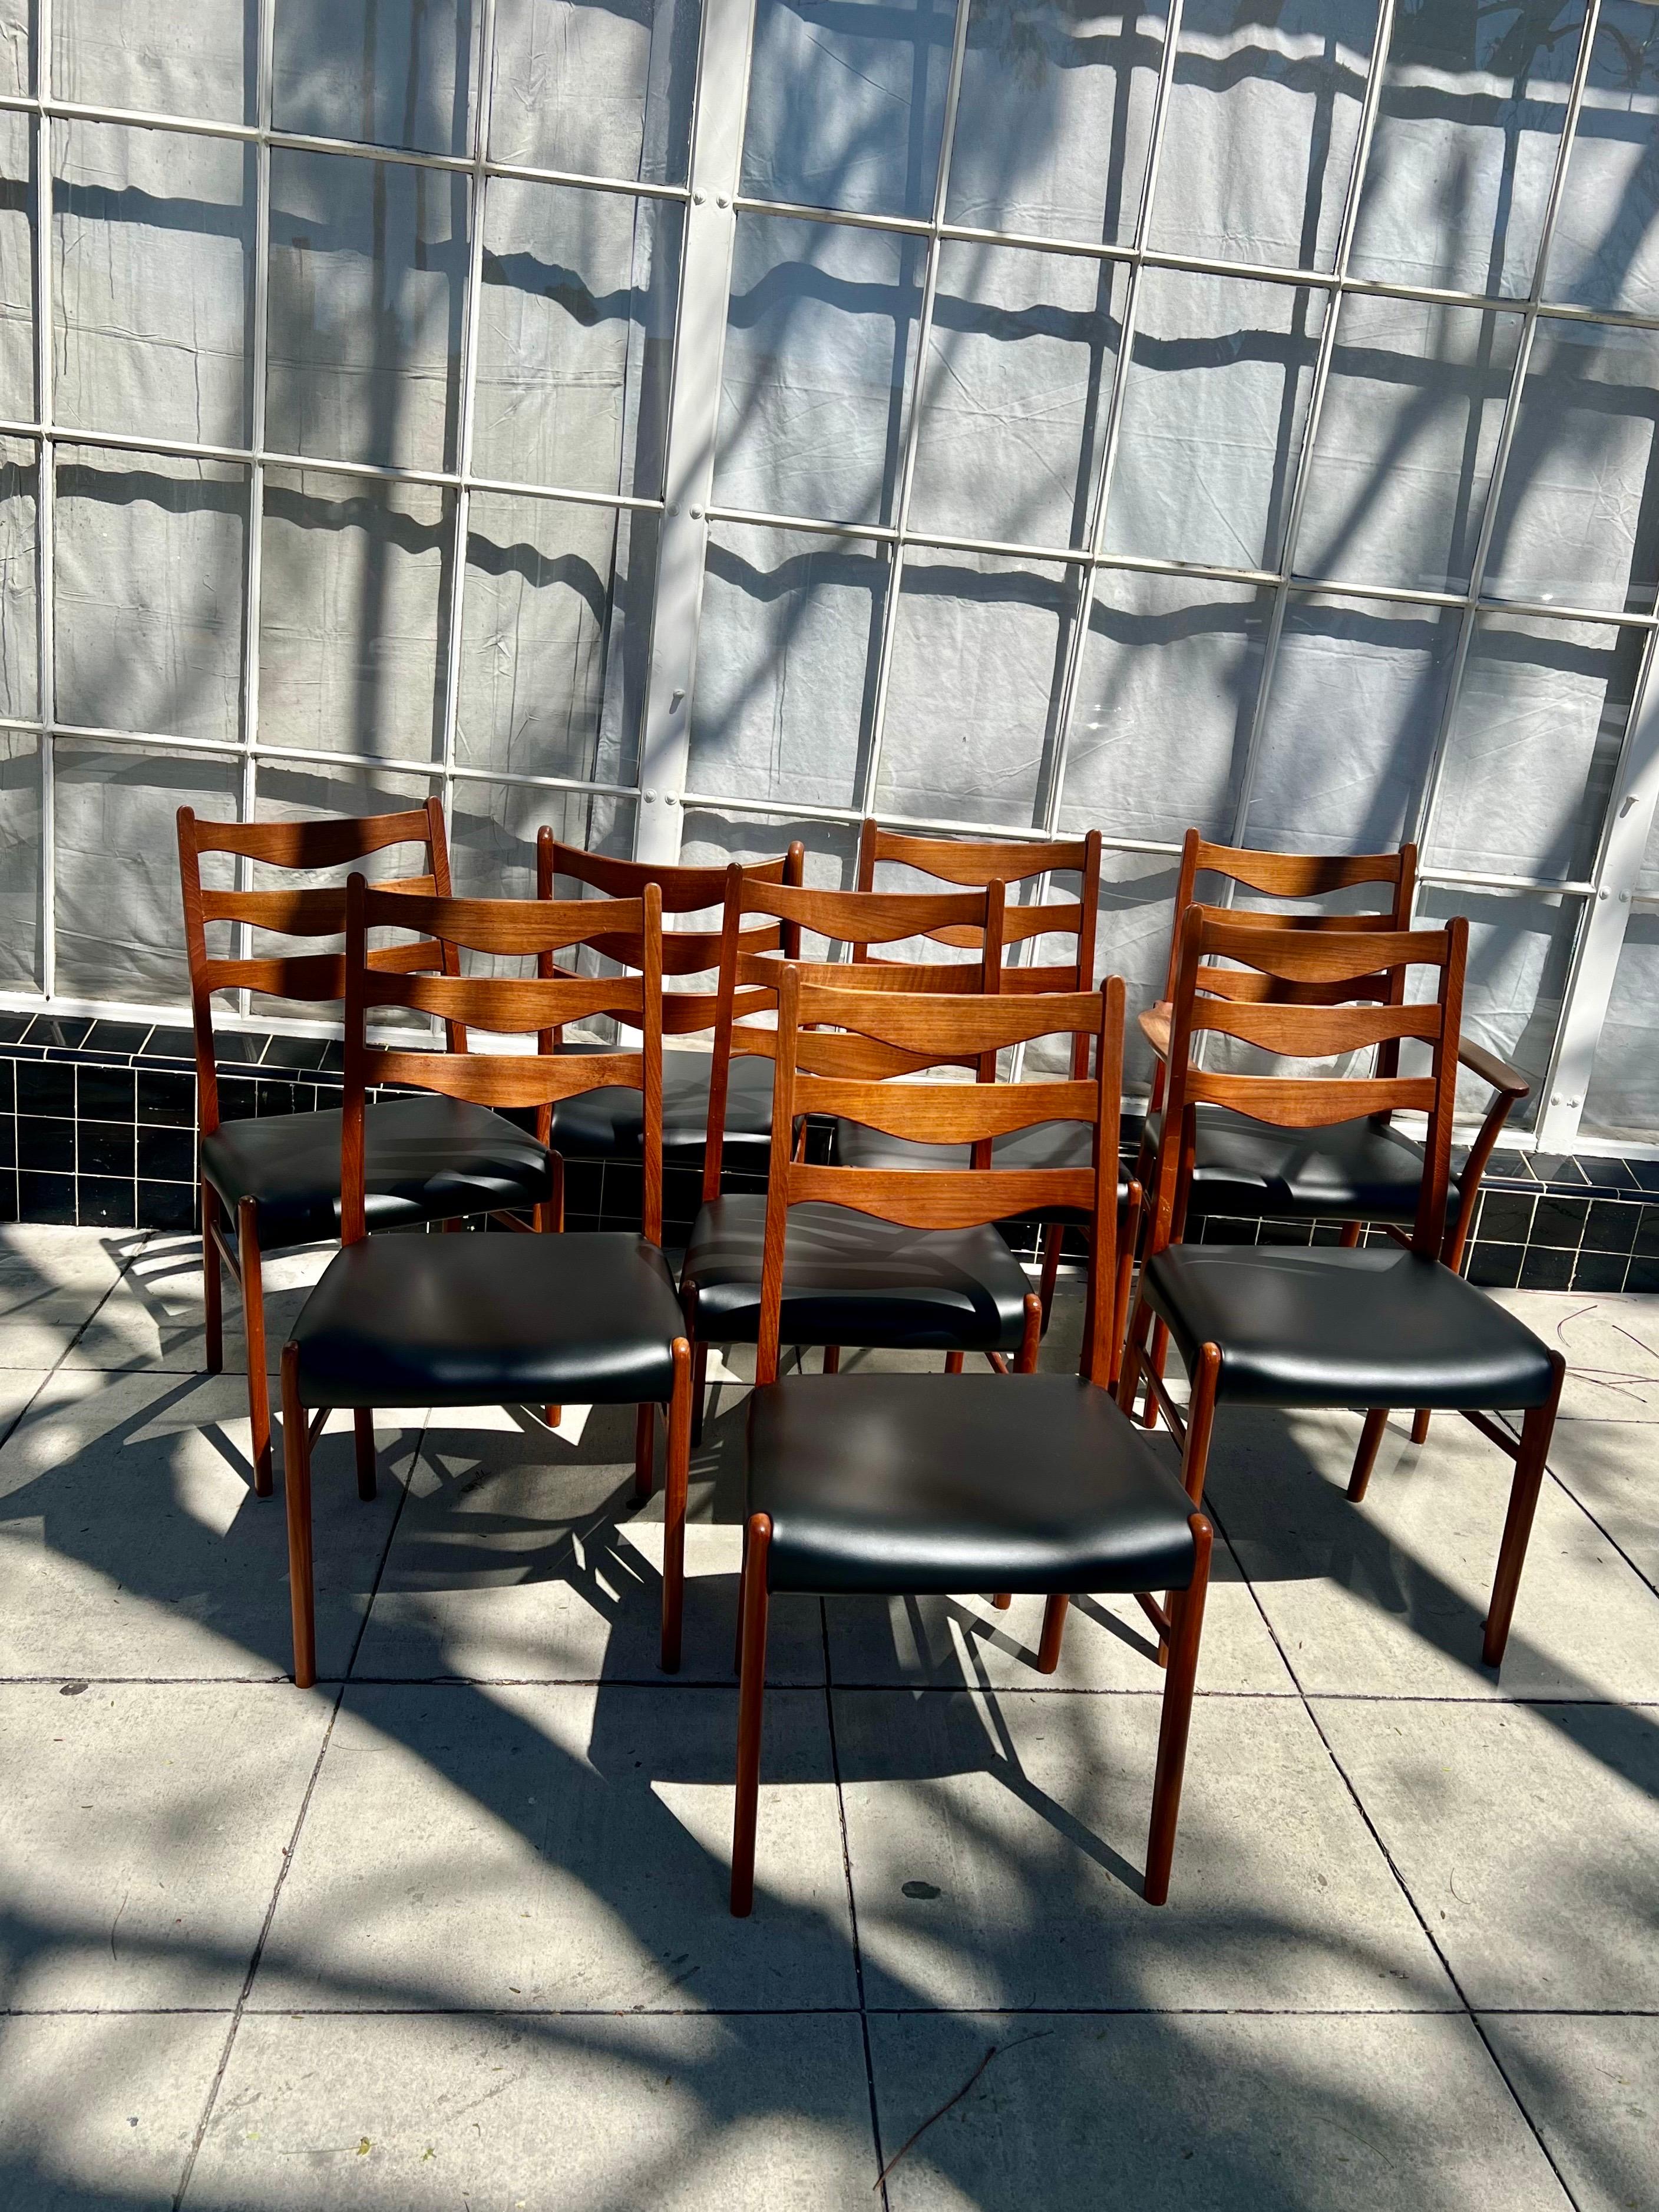  Set of 8, Midcentury Danish Modern by Arne Wahl Iversen Dining Chairs in Teak In Good Condition For Sale In San Diego, CA